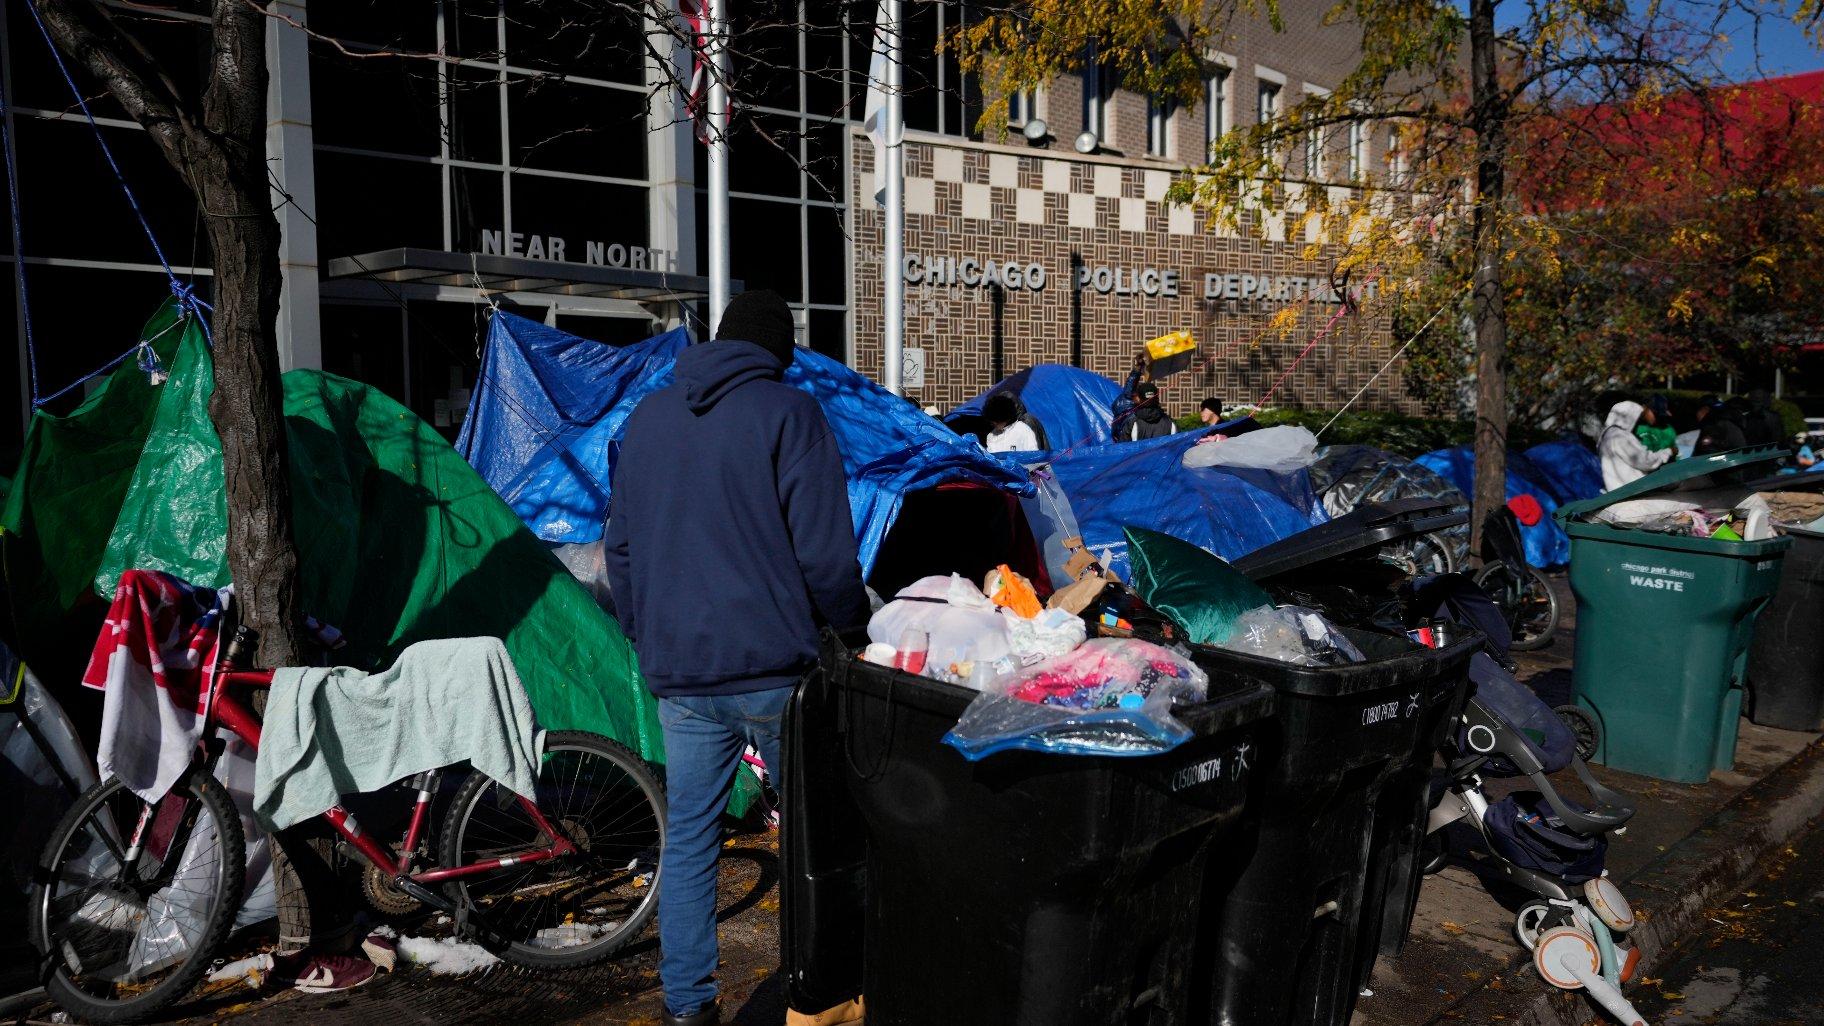  A man walks through a small tent community for migrants, Wednesday, Nov. 1, 2023, near a North Side police station in Chicago. (AP Photo / Charles Rex Arbogast, File)